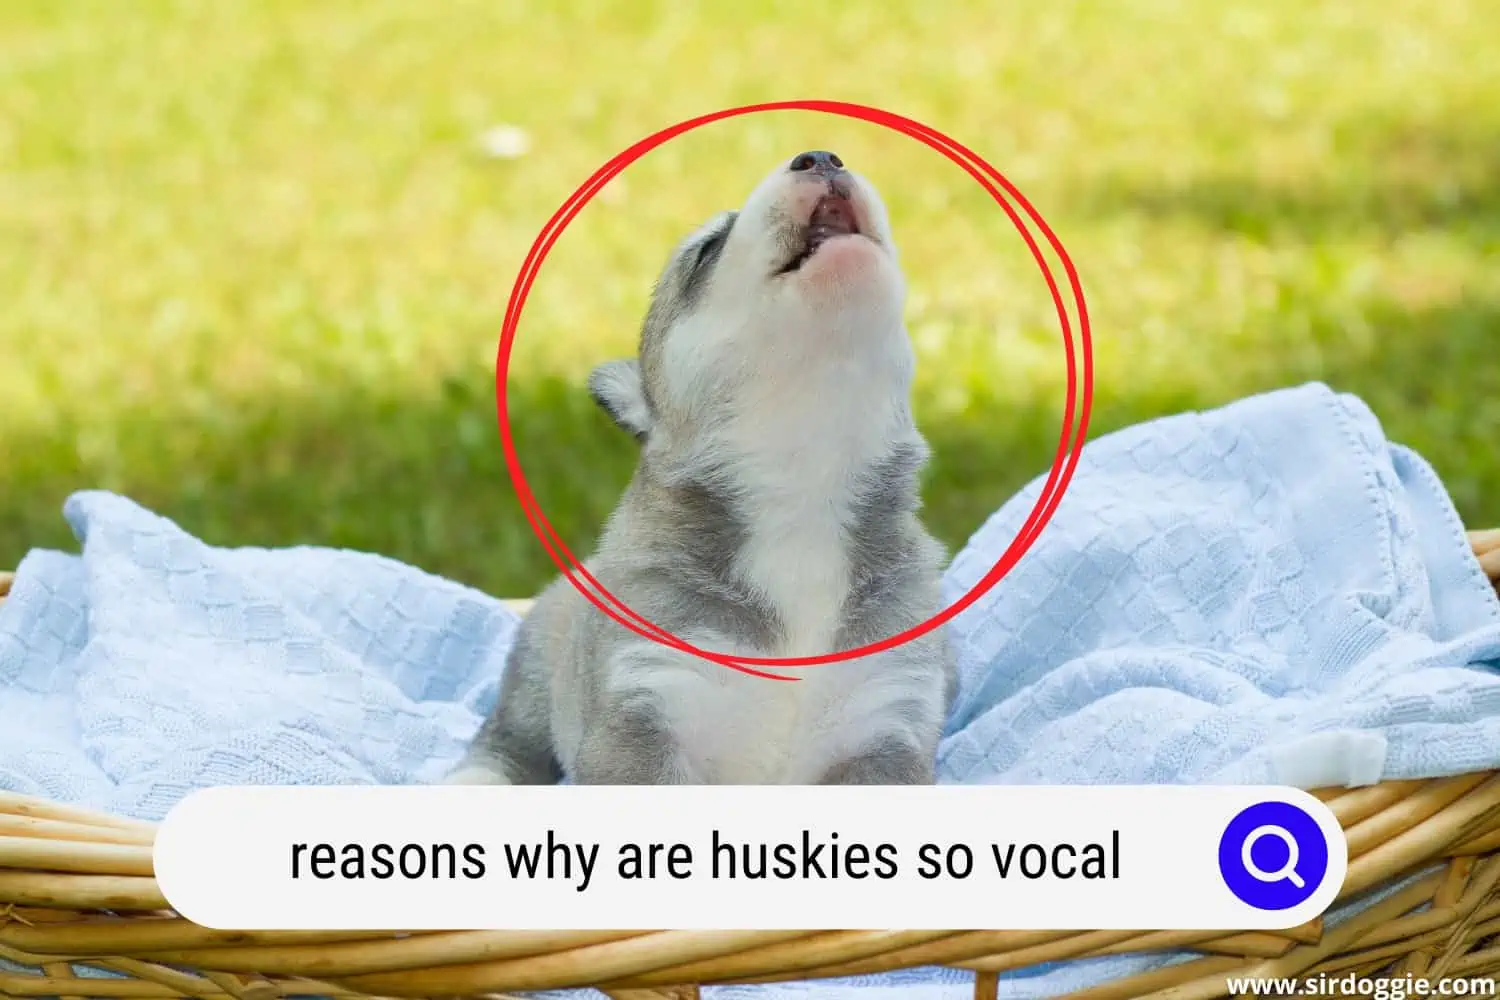 why are huskies so vocal